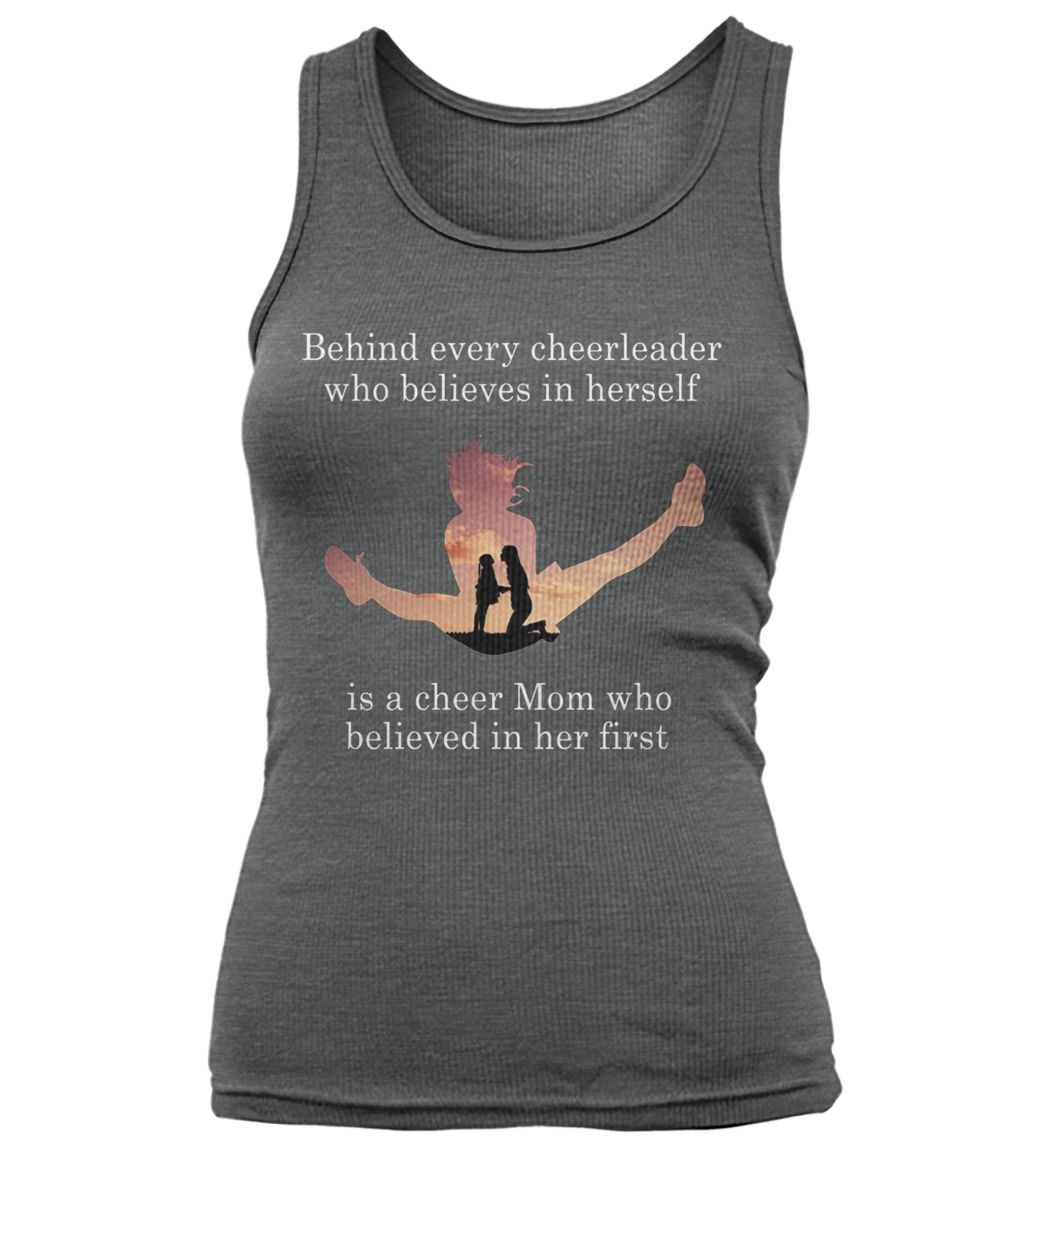 Behind every cheerleader who believes in herself is a cheer mom who believed in her first women's tank top